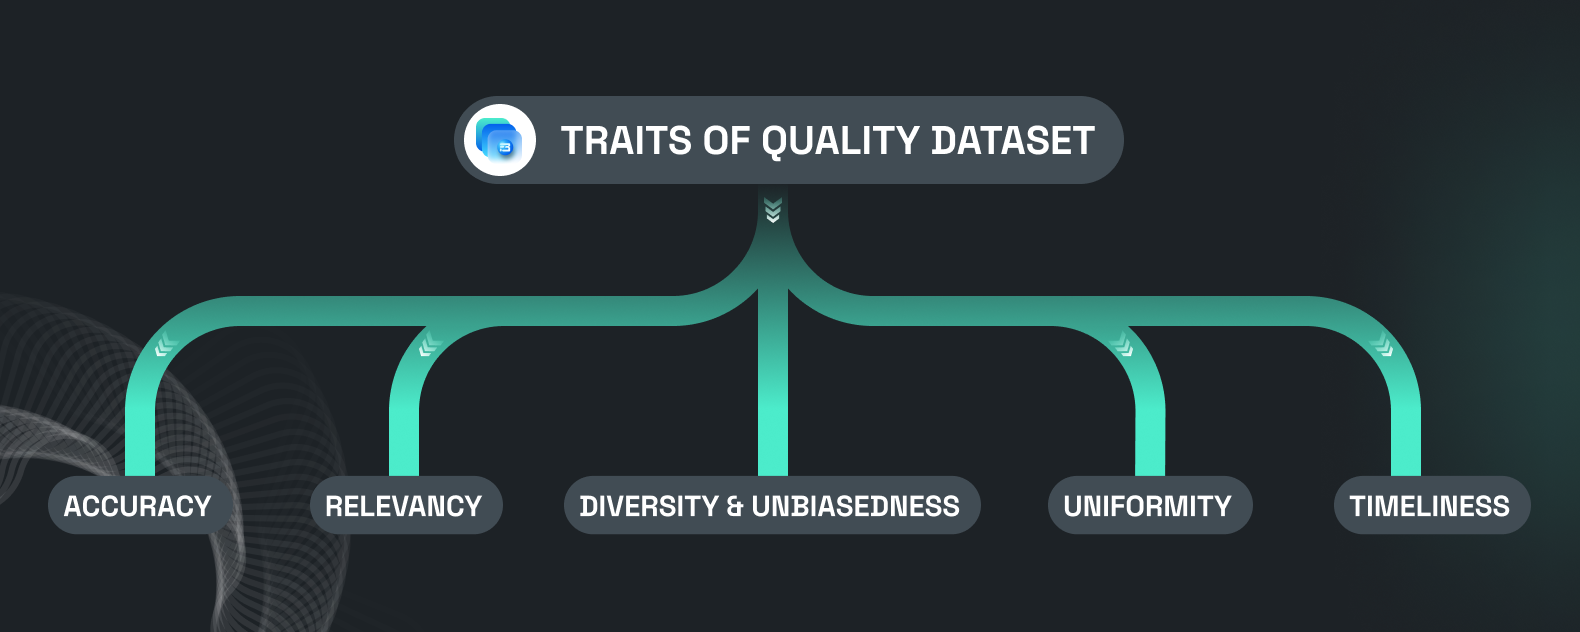 Five traits of quality datasets